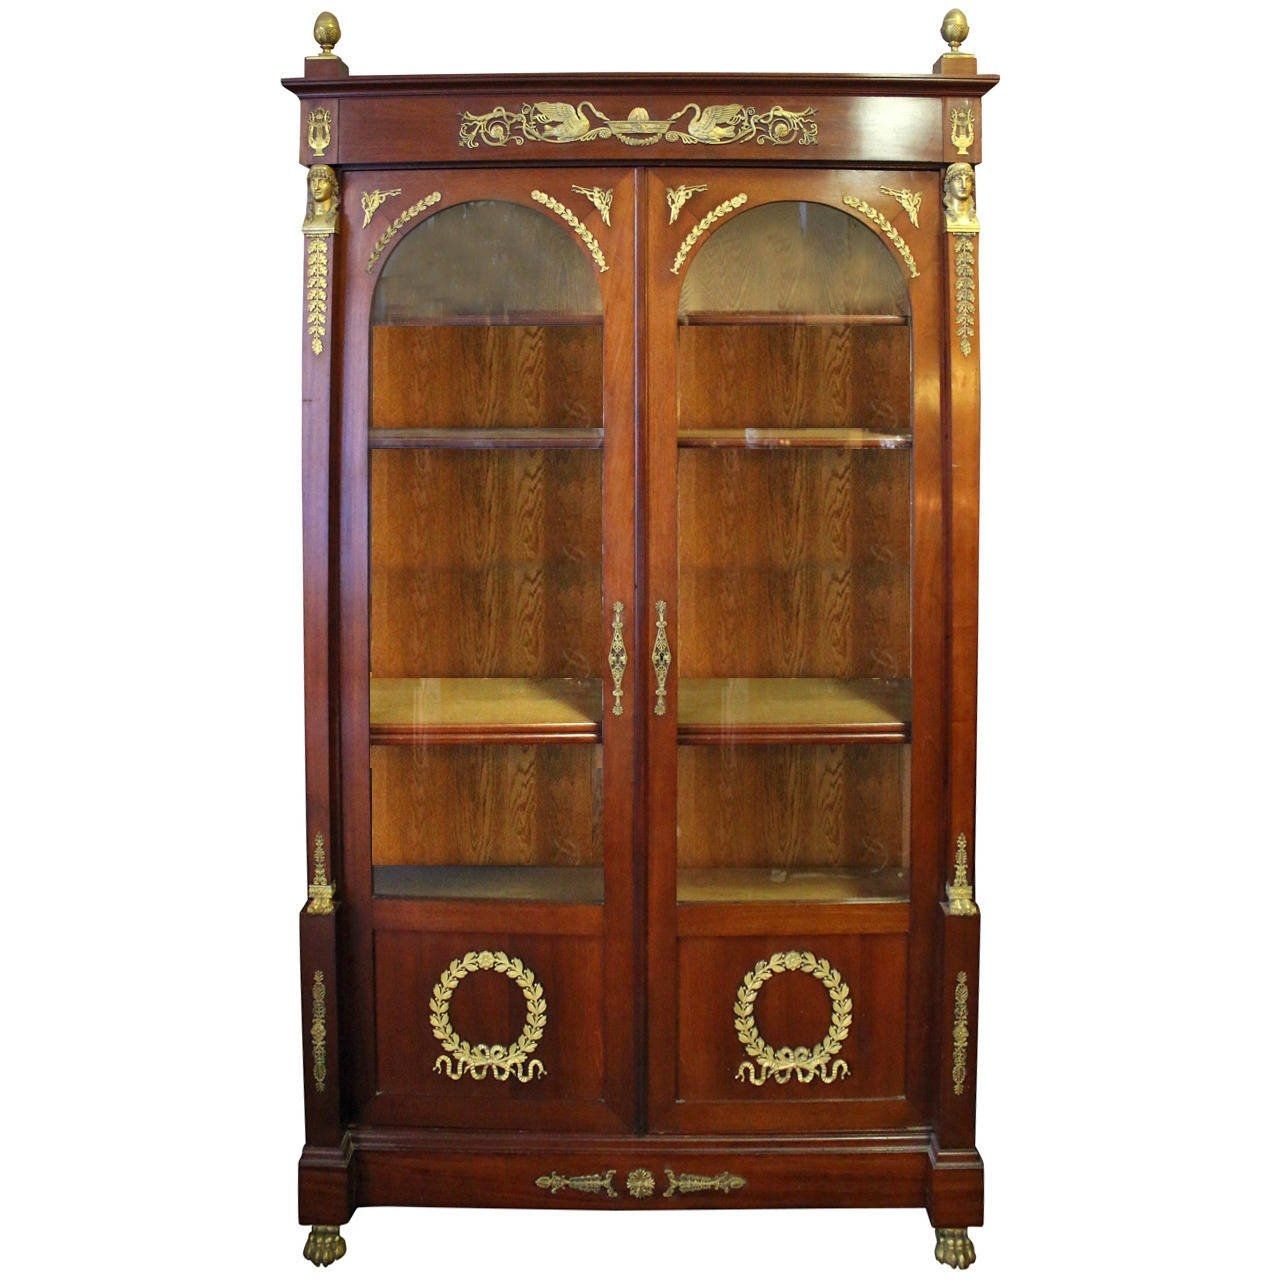 19th Century Empire Style French Mahogany Bookcase For Sale At 1stdibs Regarding Mahogany Bookcase (View 4 of 15)